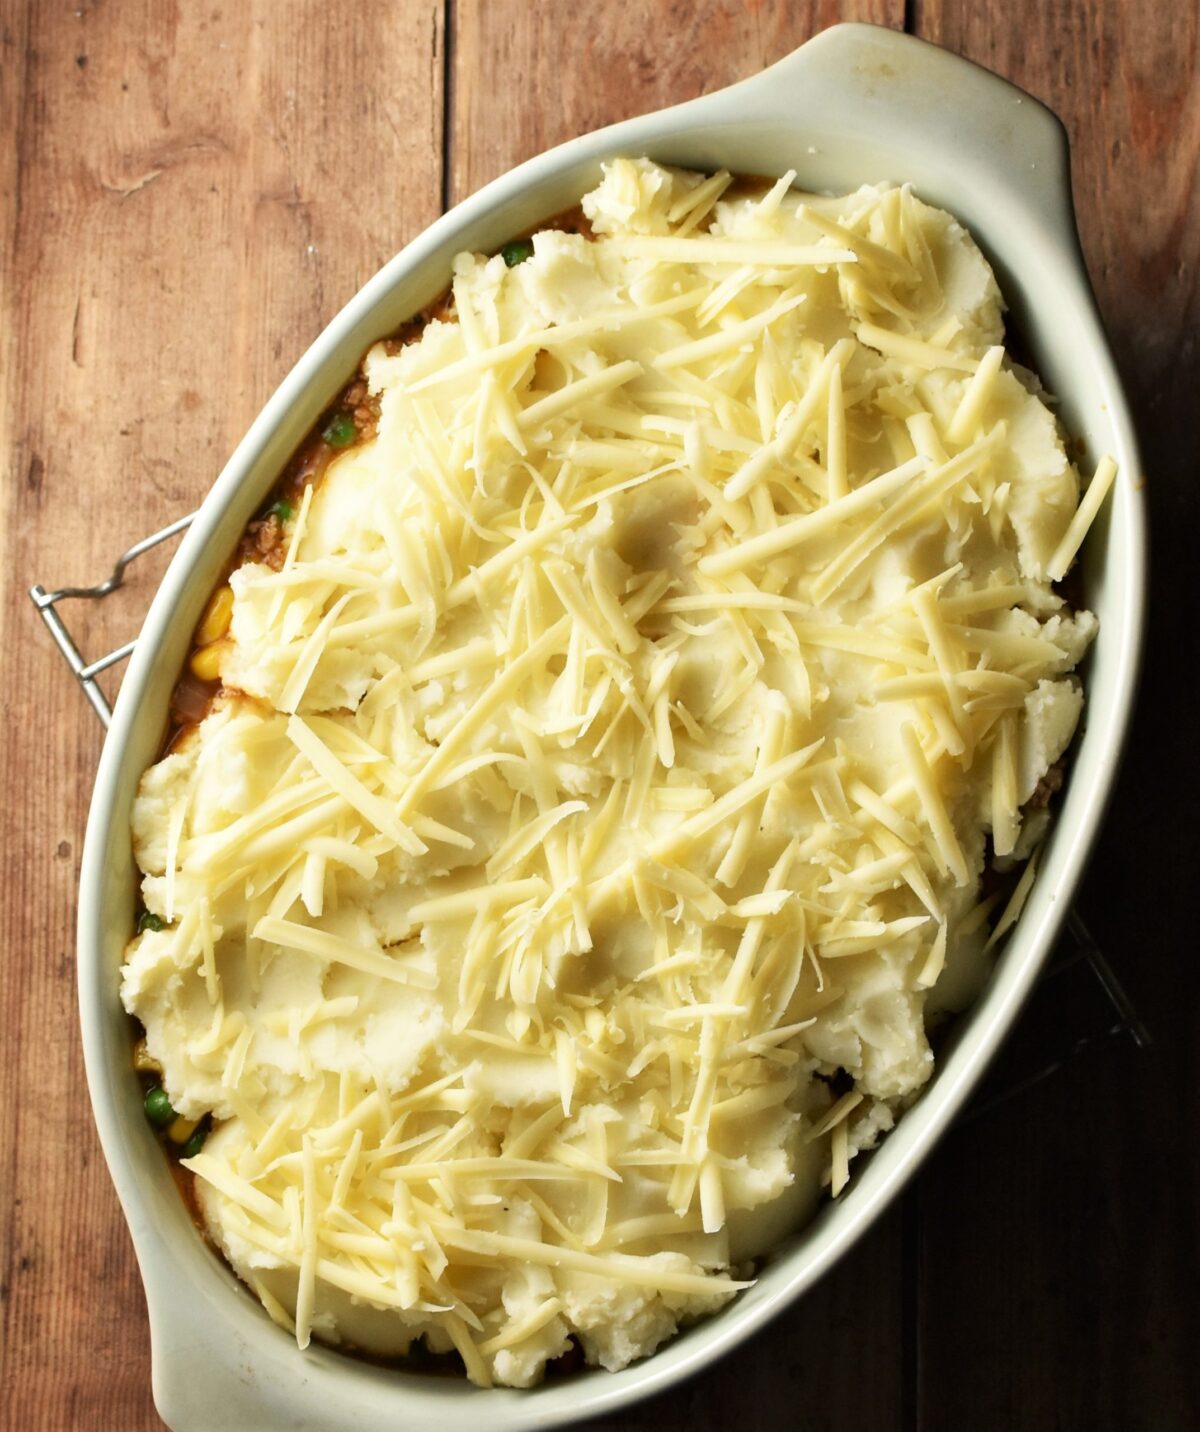 Pie topped with potato mash and grated cheese in green oval dish.